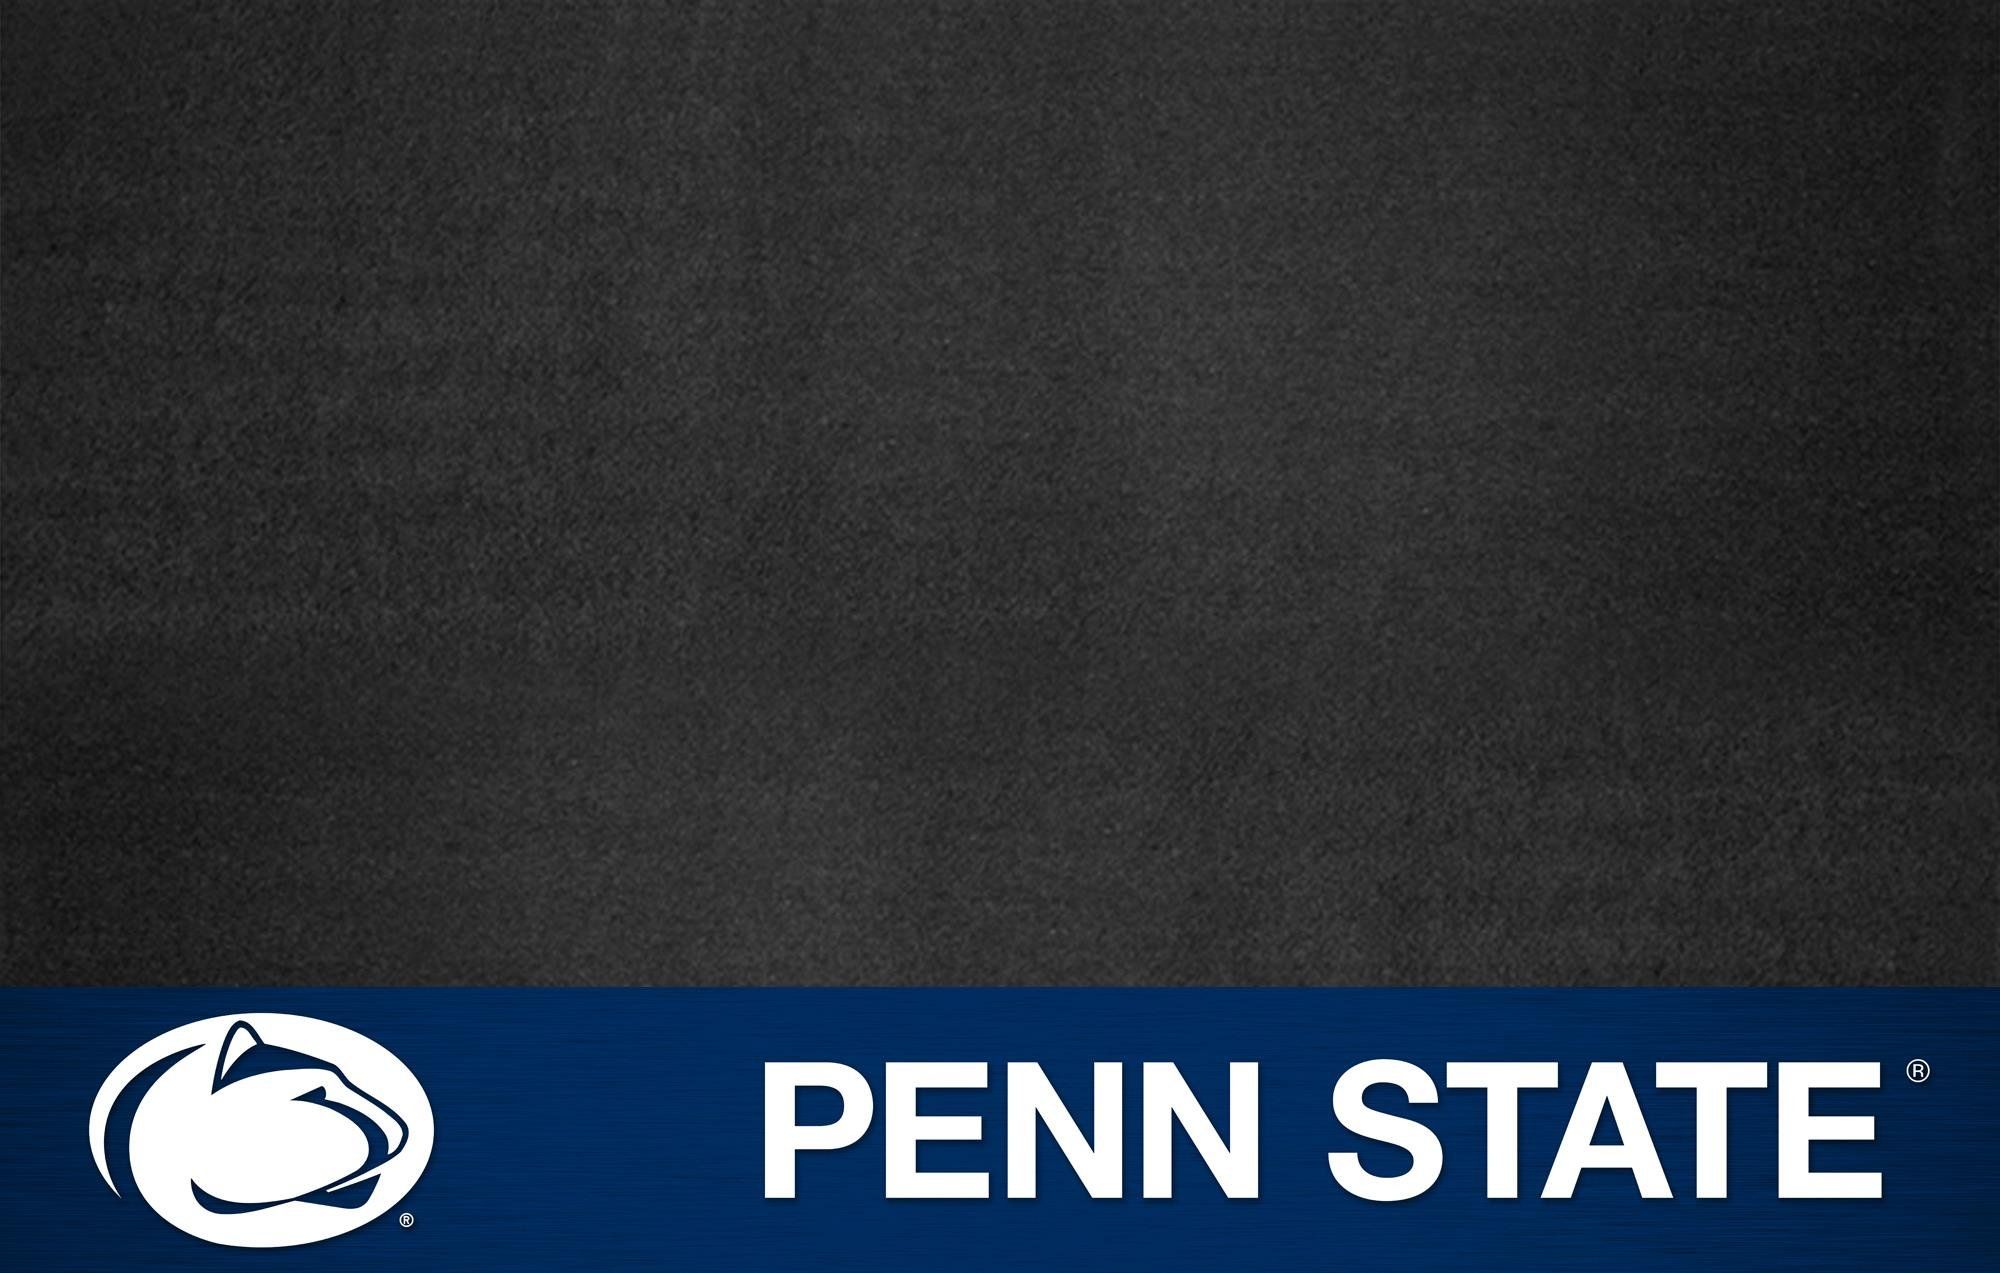 PENN STATE NITTANY LIONS college football wallpaper 2000x1273